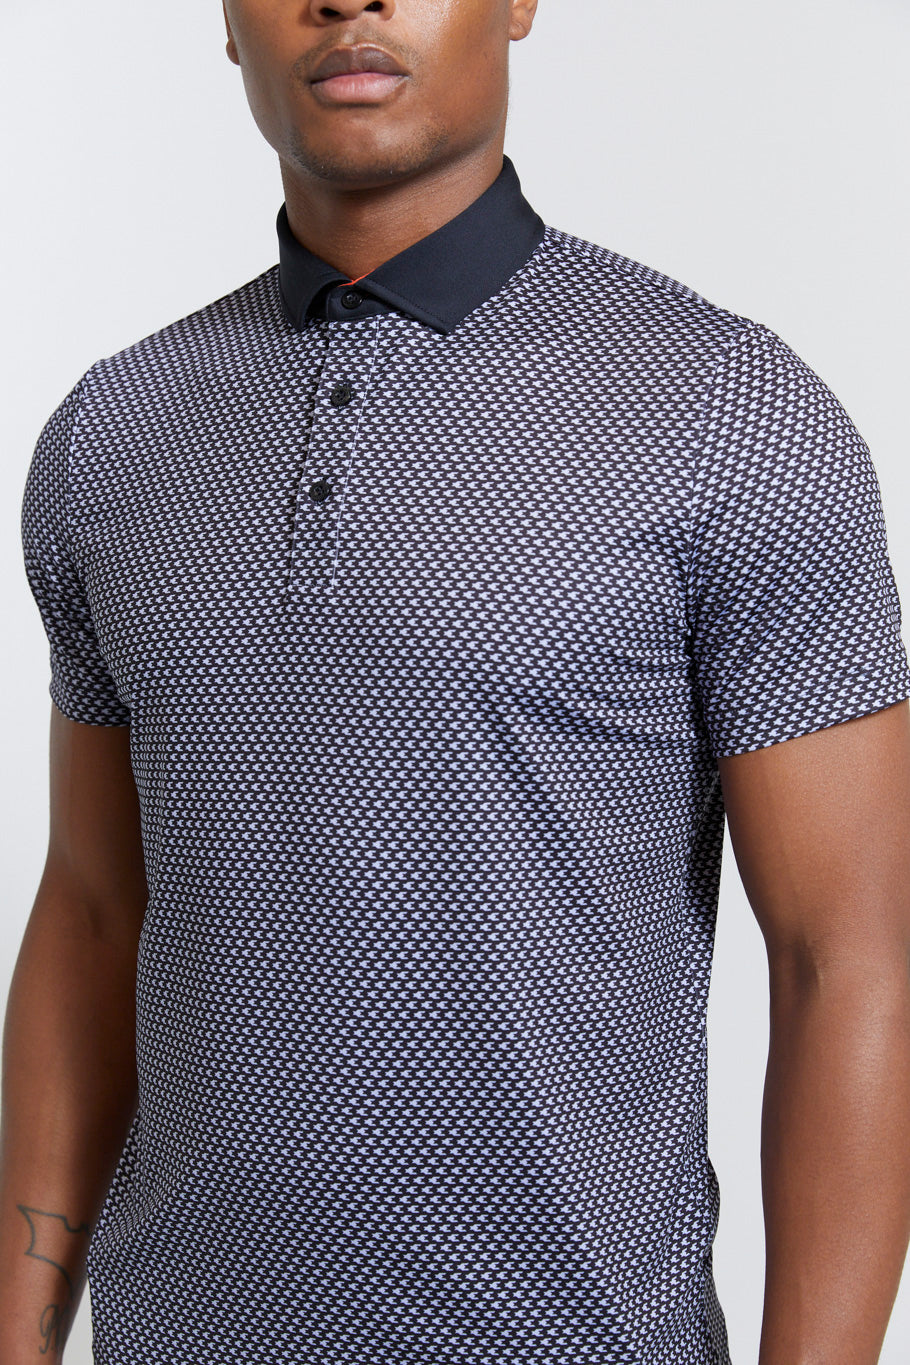 Image of the jarvis polo in tuxedo ss23